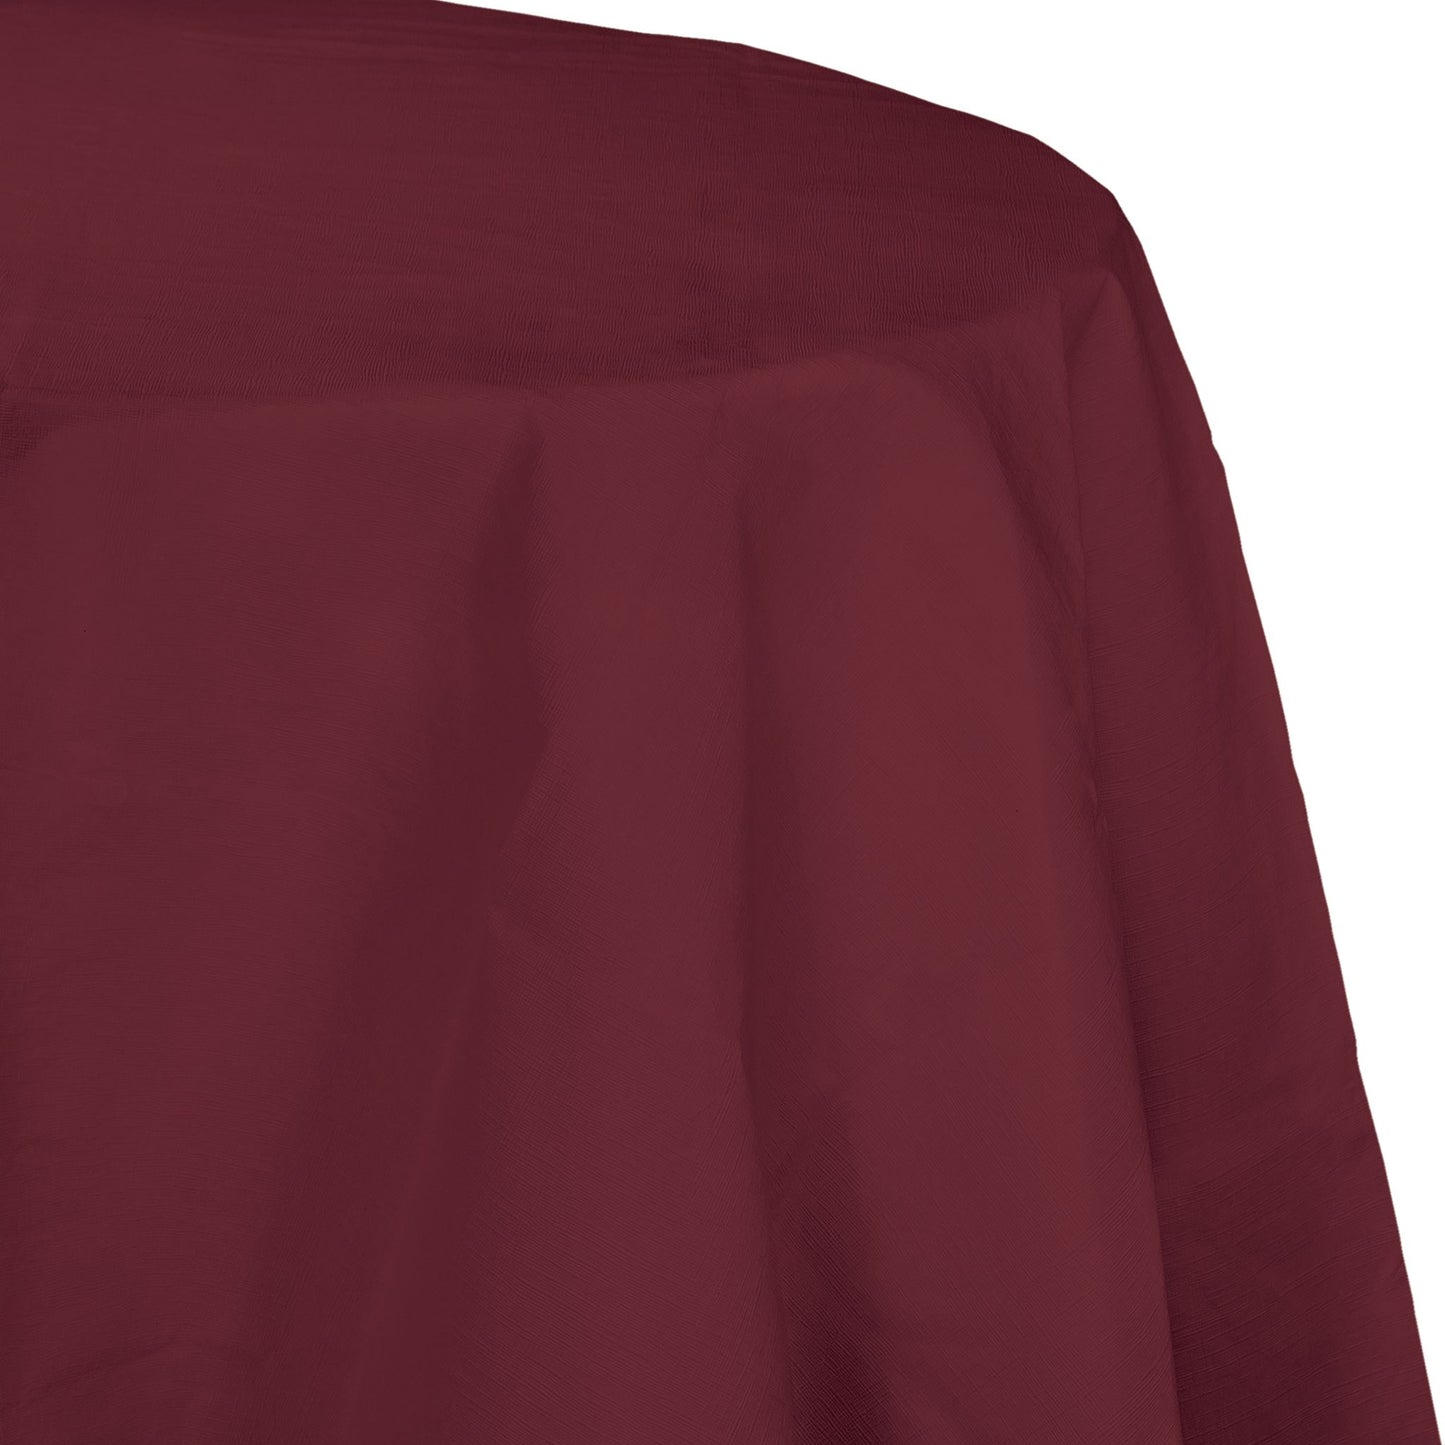 Round Paper Table Cover - Burgundy